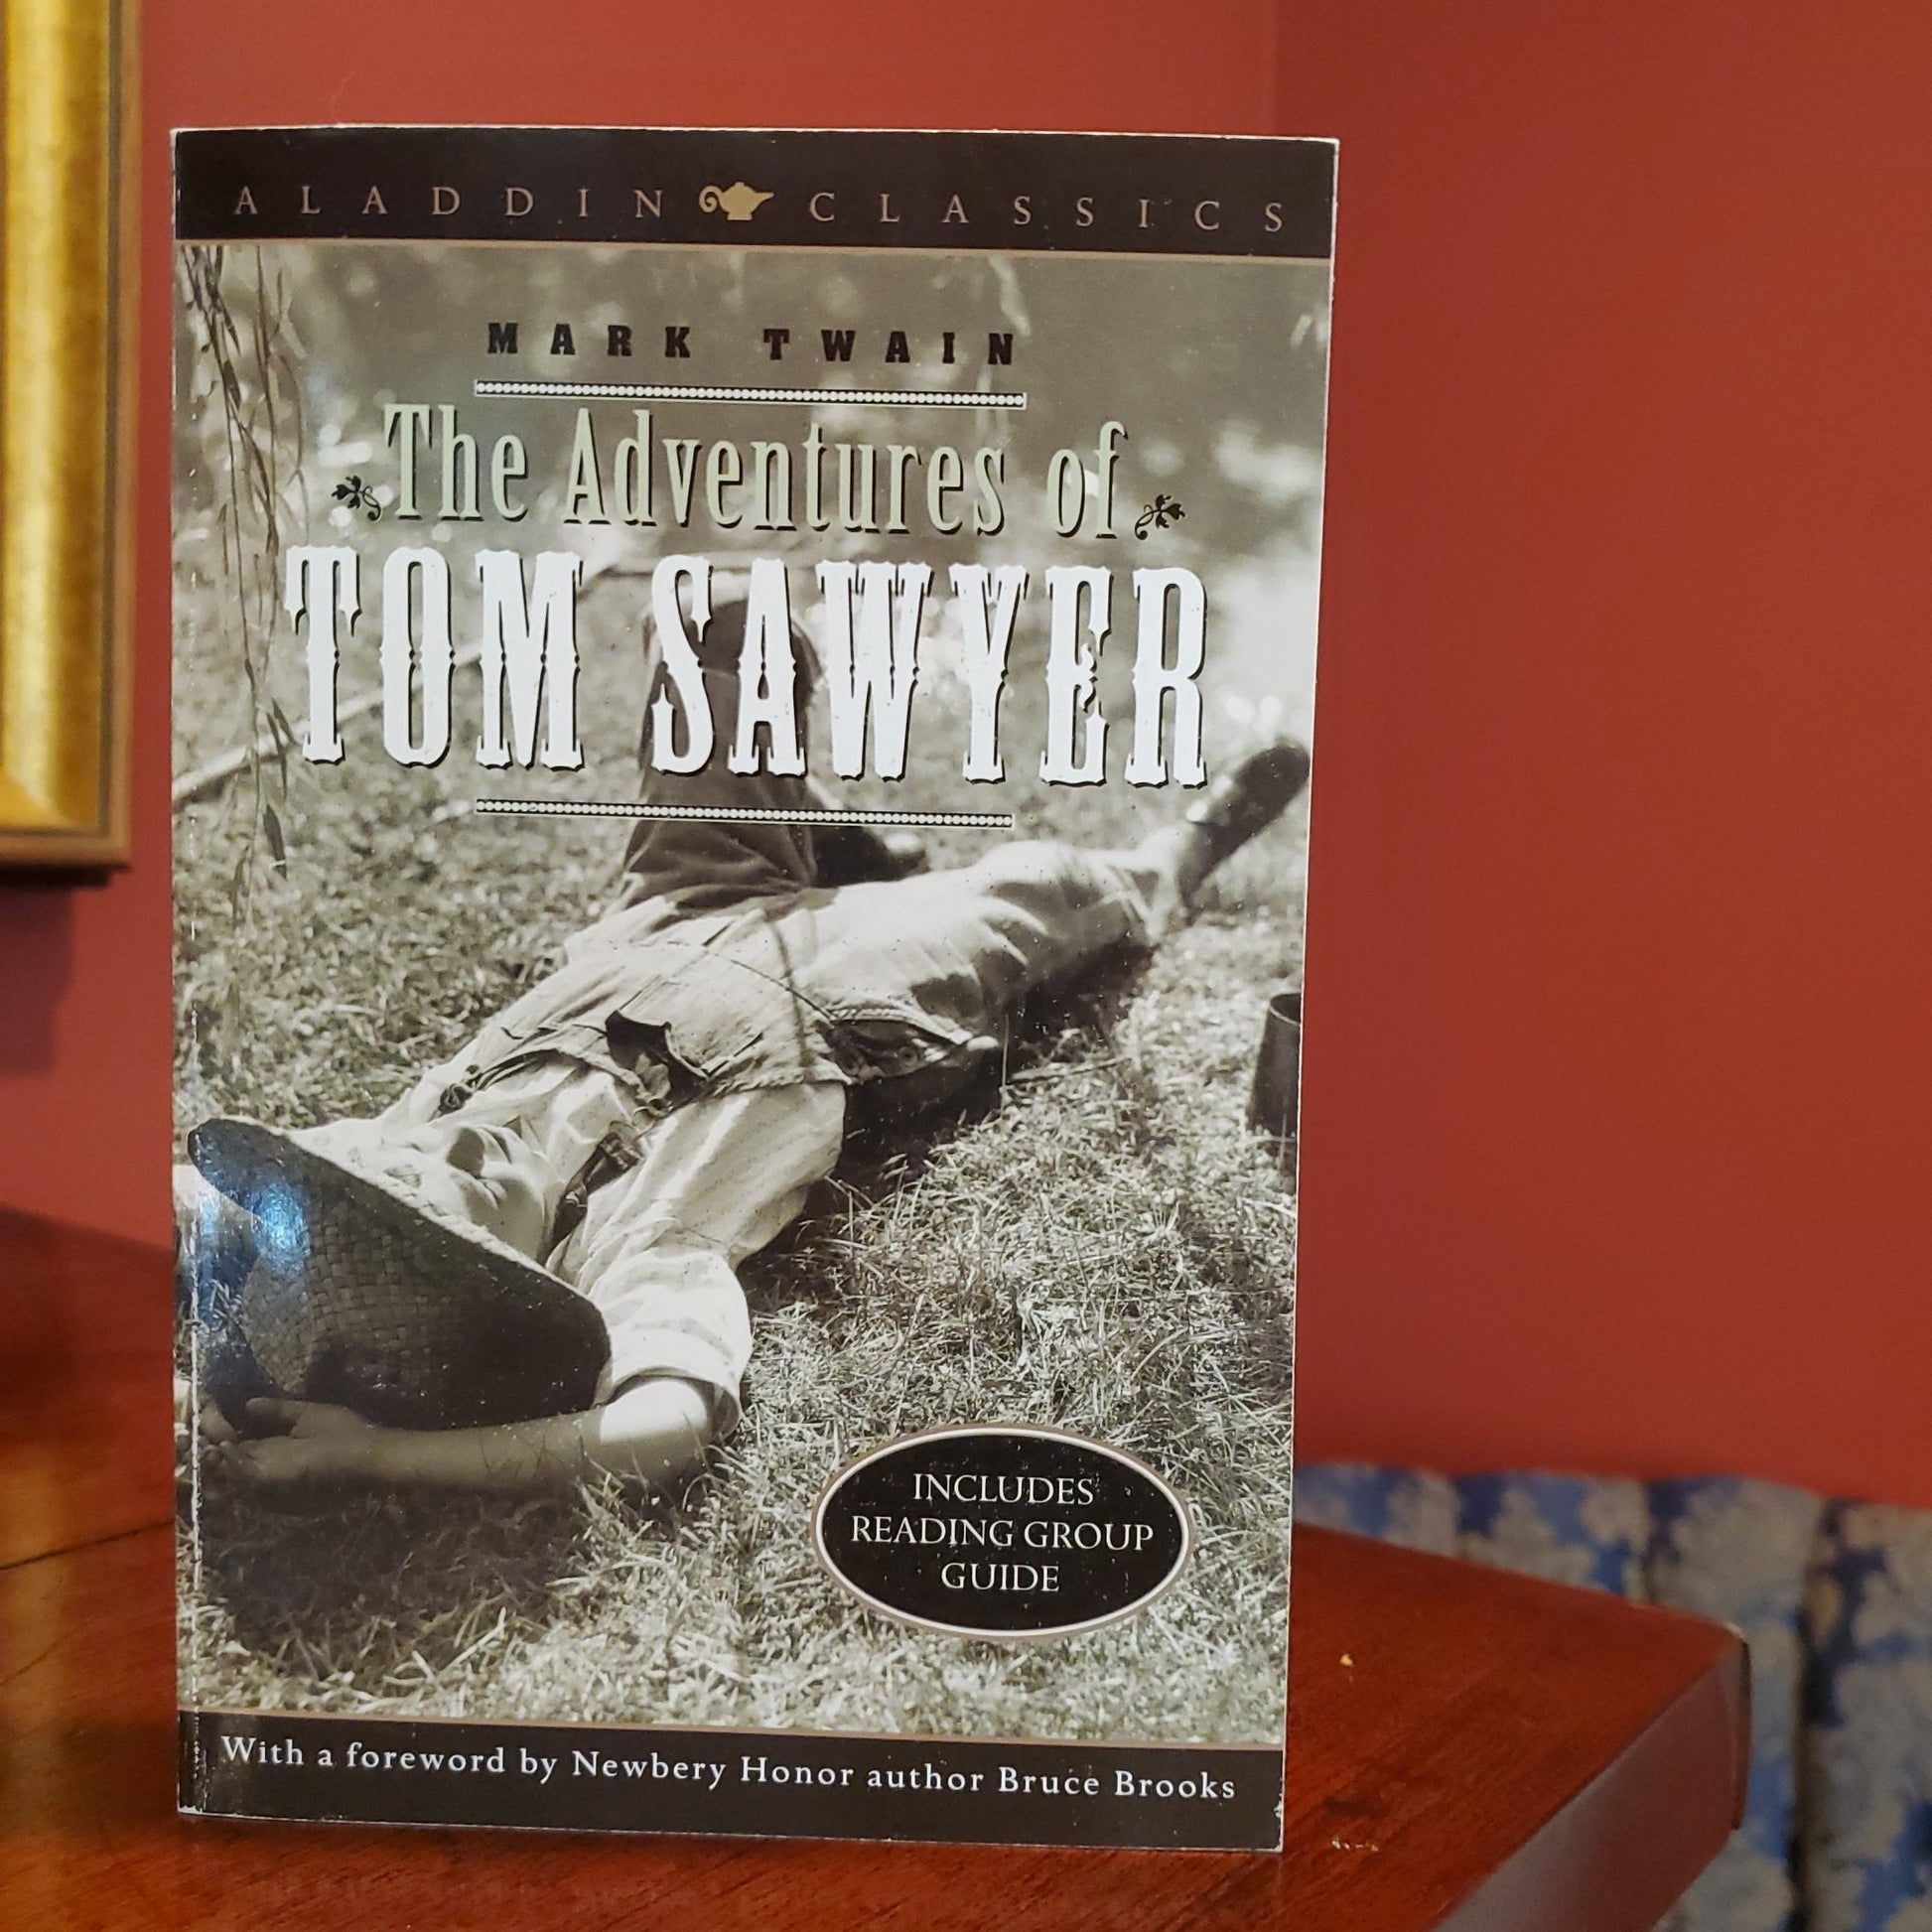 The Adventures of Tom Sawyer - [ash-ling] Booksellers